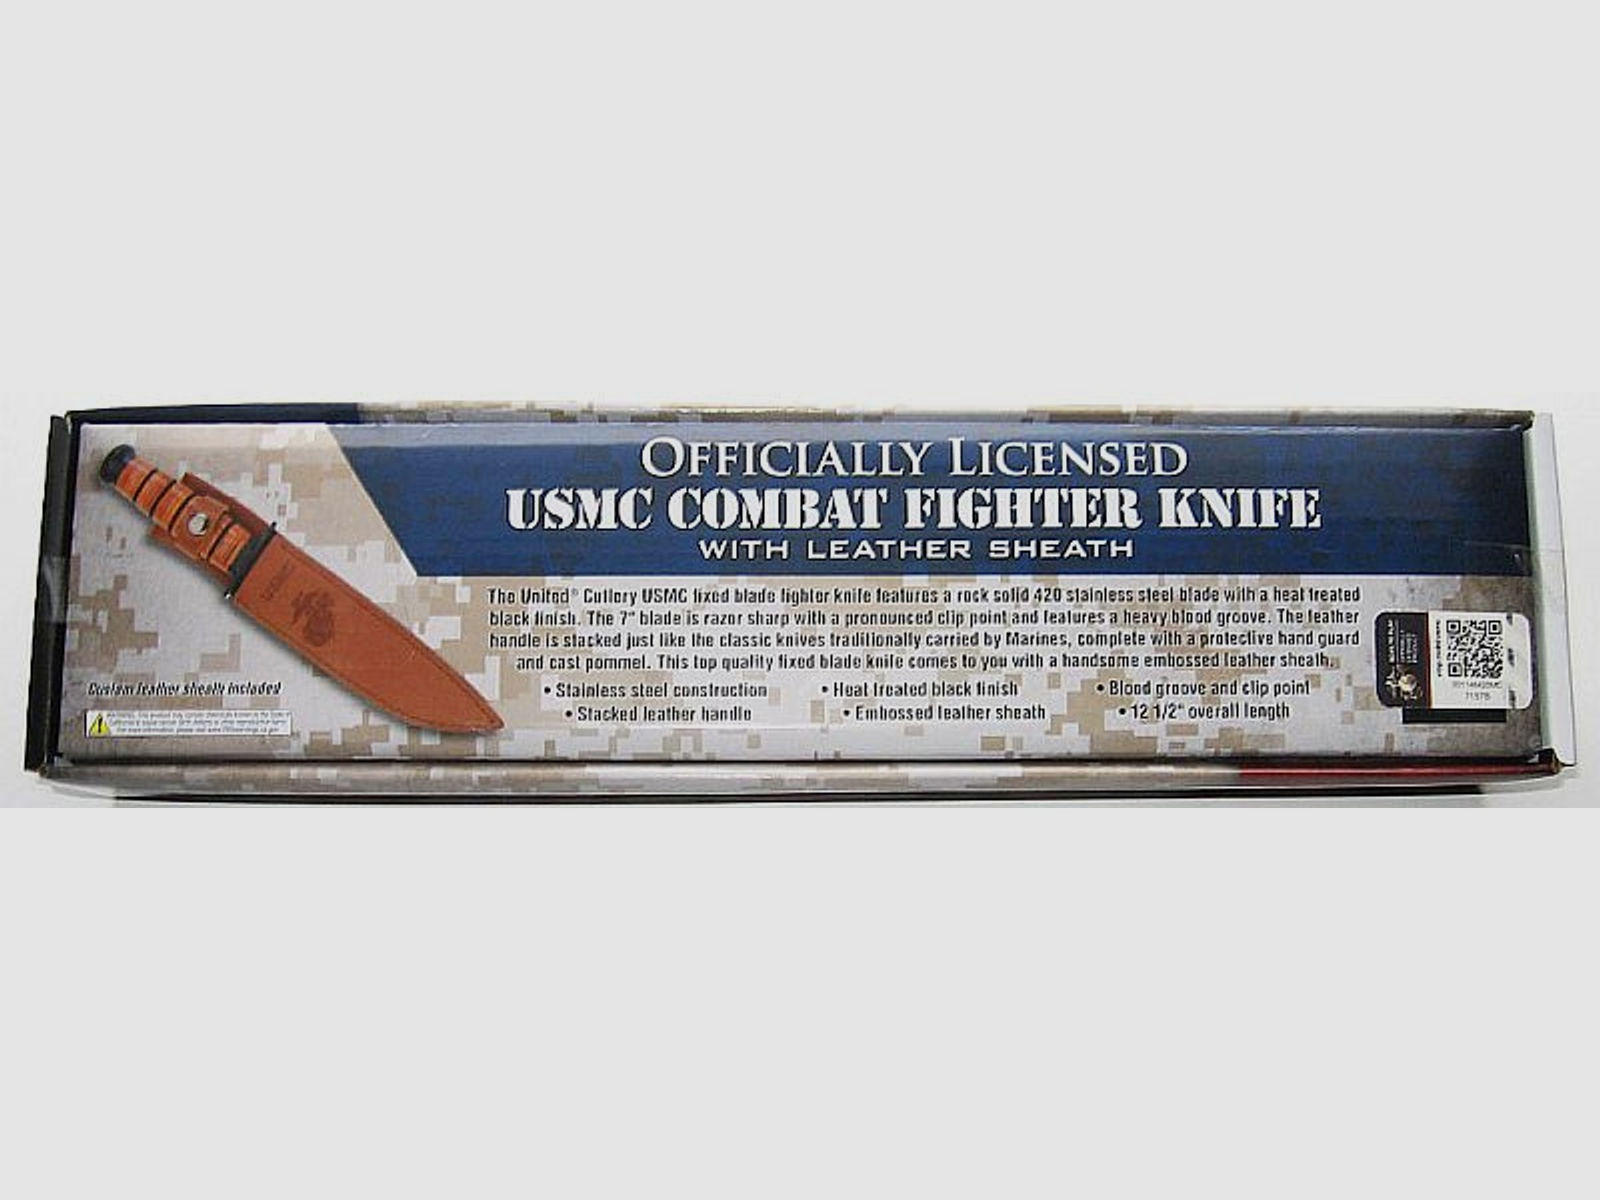 USMC COMBAT FIGHTER KNIFE Officially Licensed by United Cutlery Neu/Ovp